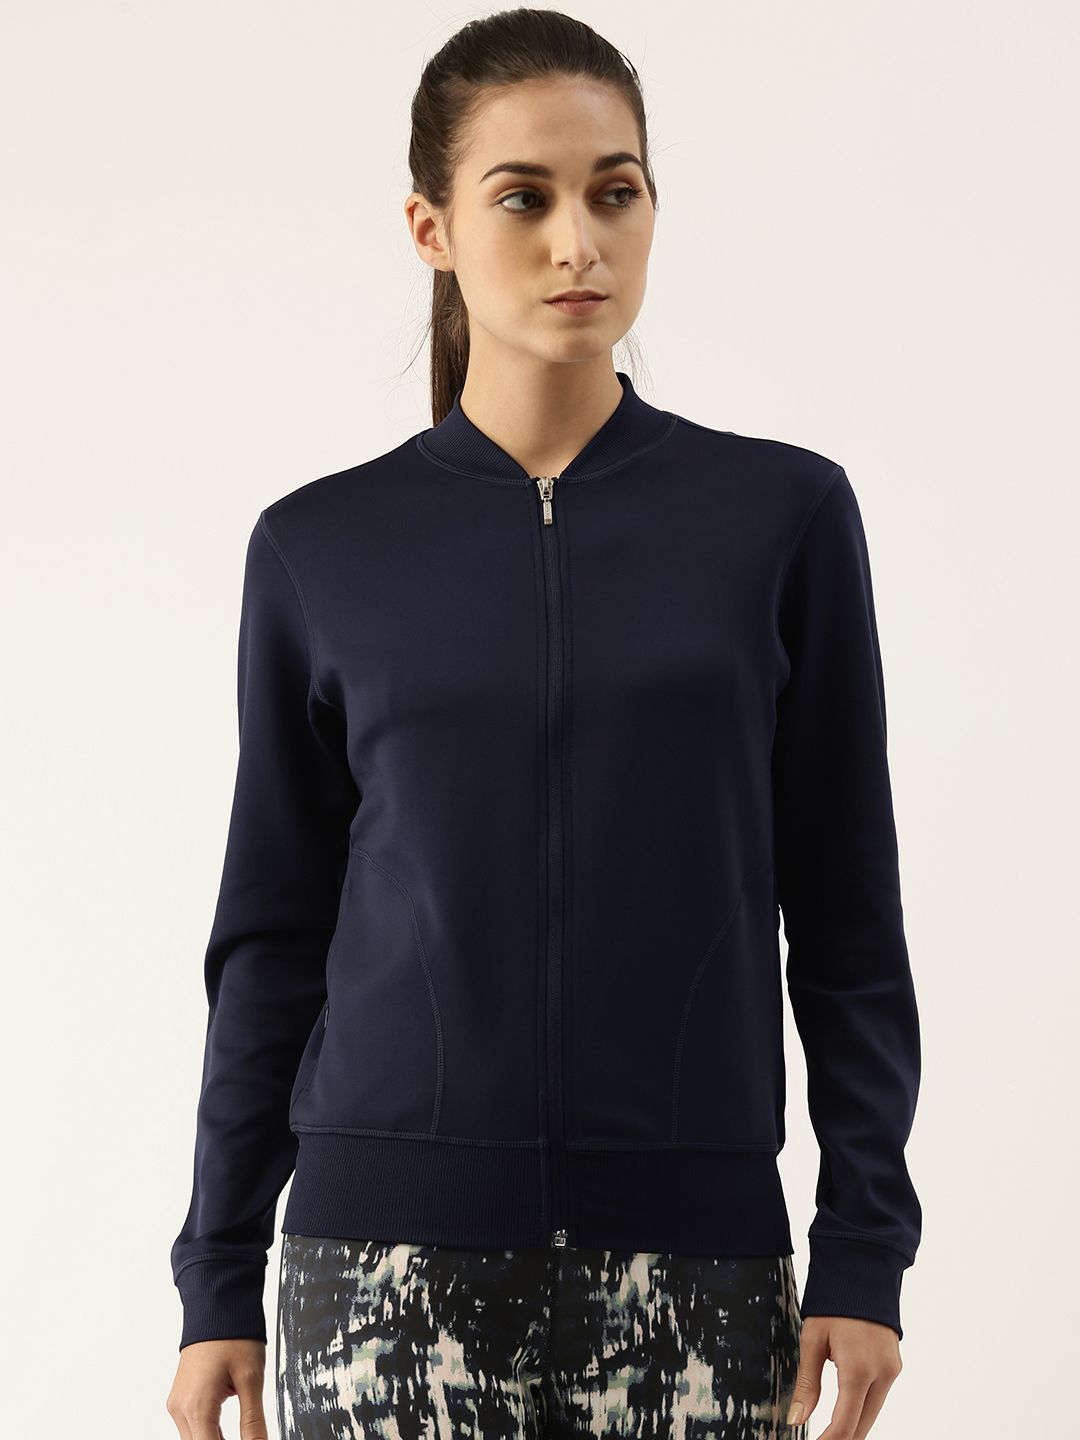 Enamor Women Navy Blue Lightweight Antimicrobial Outdoor Bomber Jacket Price in India